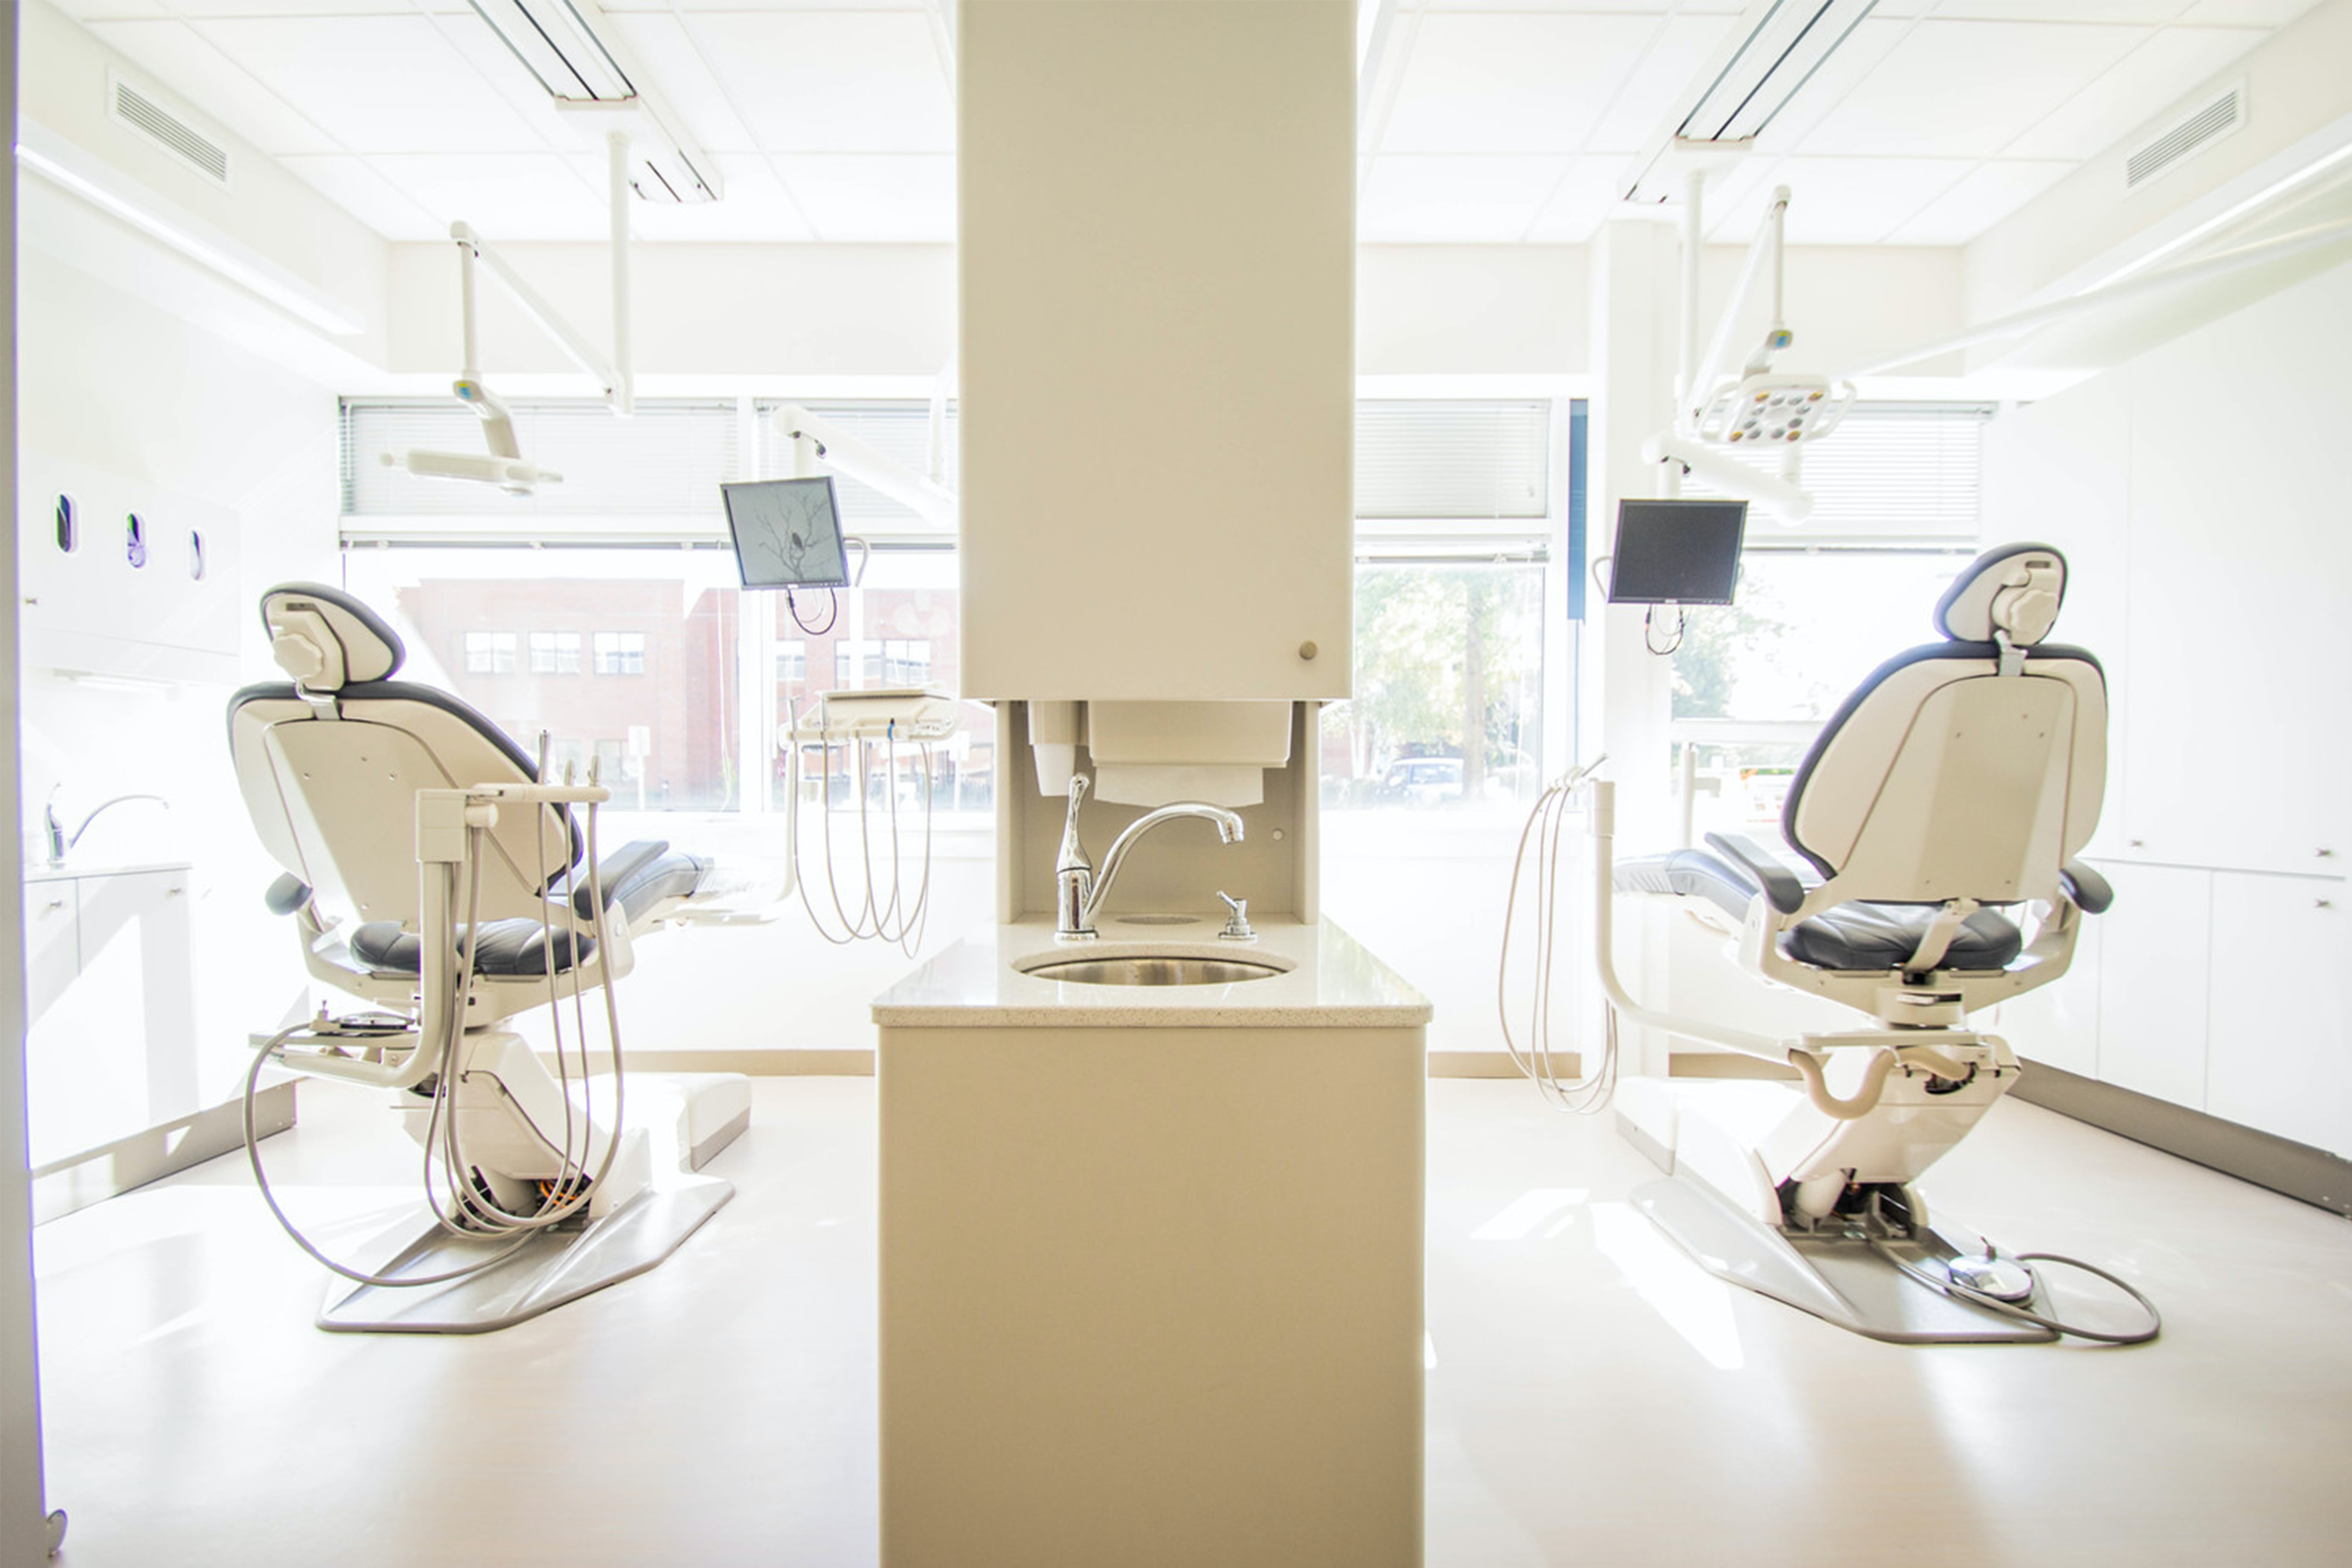 Provision of dental treatment in Harju county